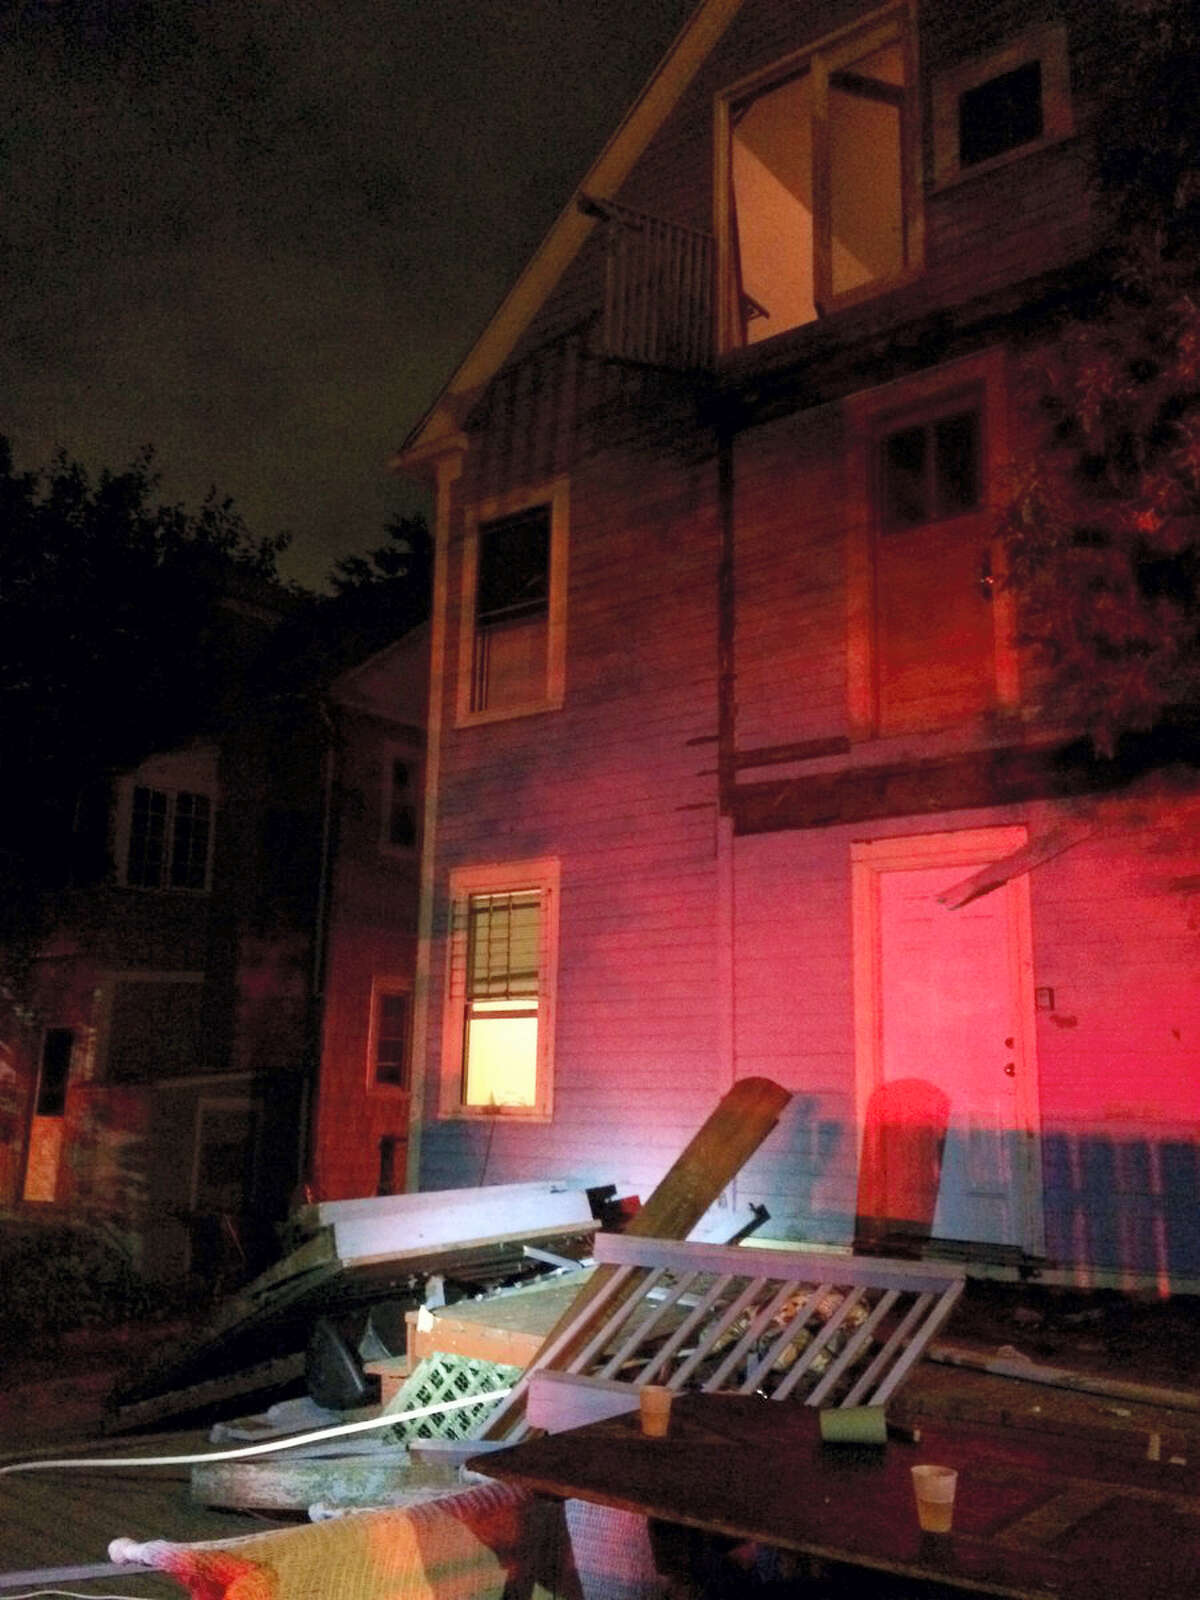 This photo provided by the Hartford Police Department shows a collapsed deck at a house near Trinity College in Hartford, Conn. on Sept. 10, 2016. Deputy Chief Brian Foley of the Hartford police posted on his Twitter feed that a third-floor deck of a house about two-tenths of a mile from the Trinity campus collapsed onto a second-floor deck, which subsequently fell onto a first-floor deck.